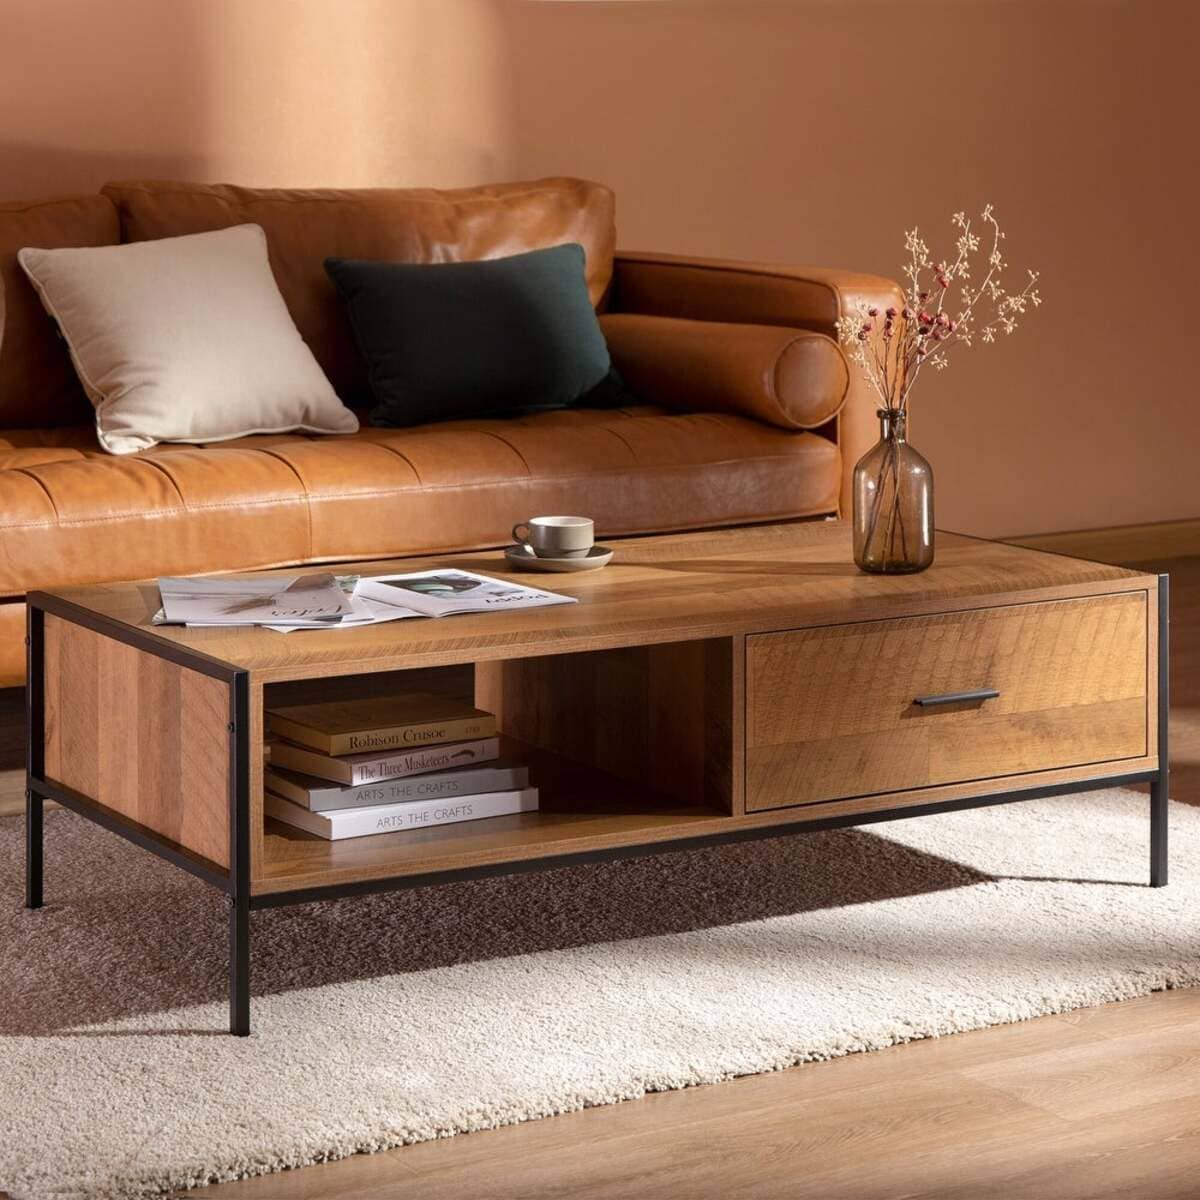 Stunning Wooden Coffee Tables with Storage